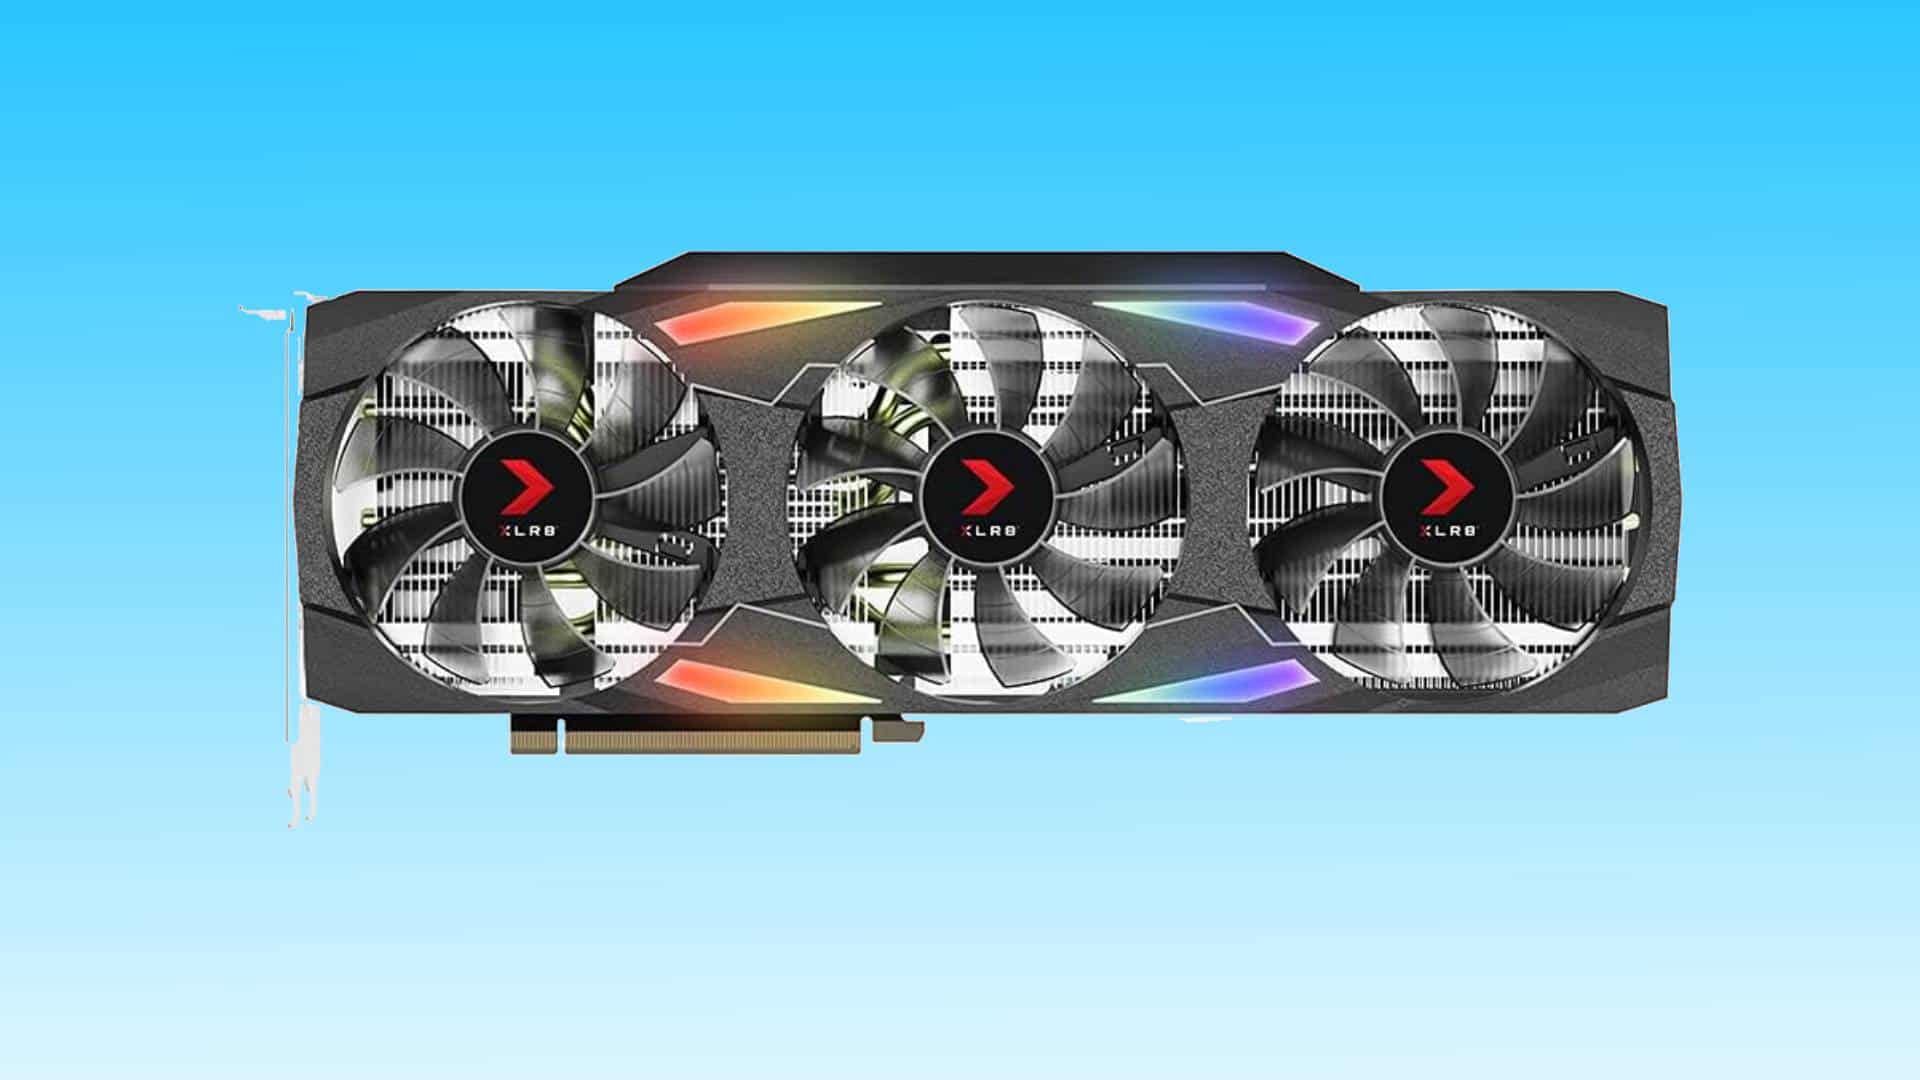 High-performance overclocked RTX 3080 graphics card with triple-fan cooling setup against a blue background.